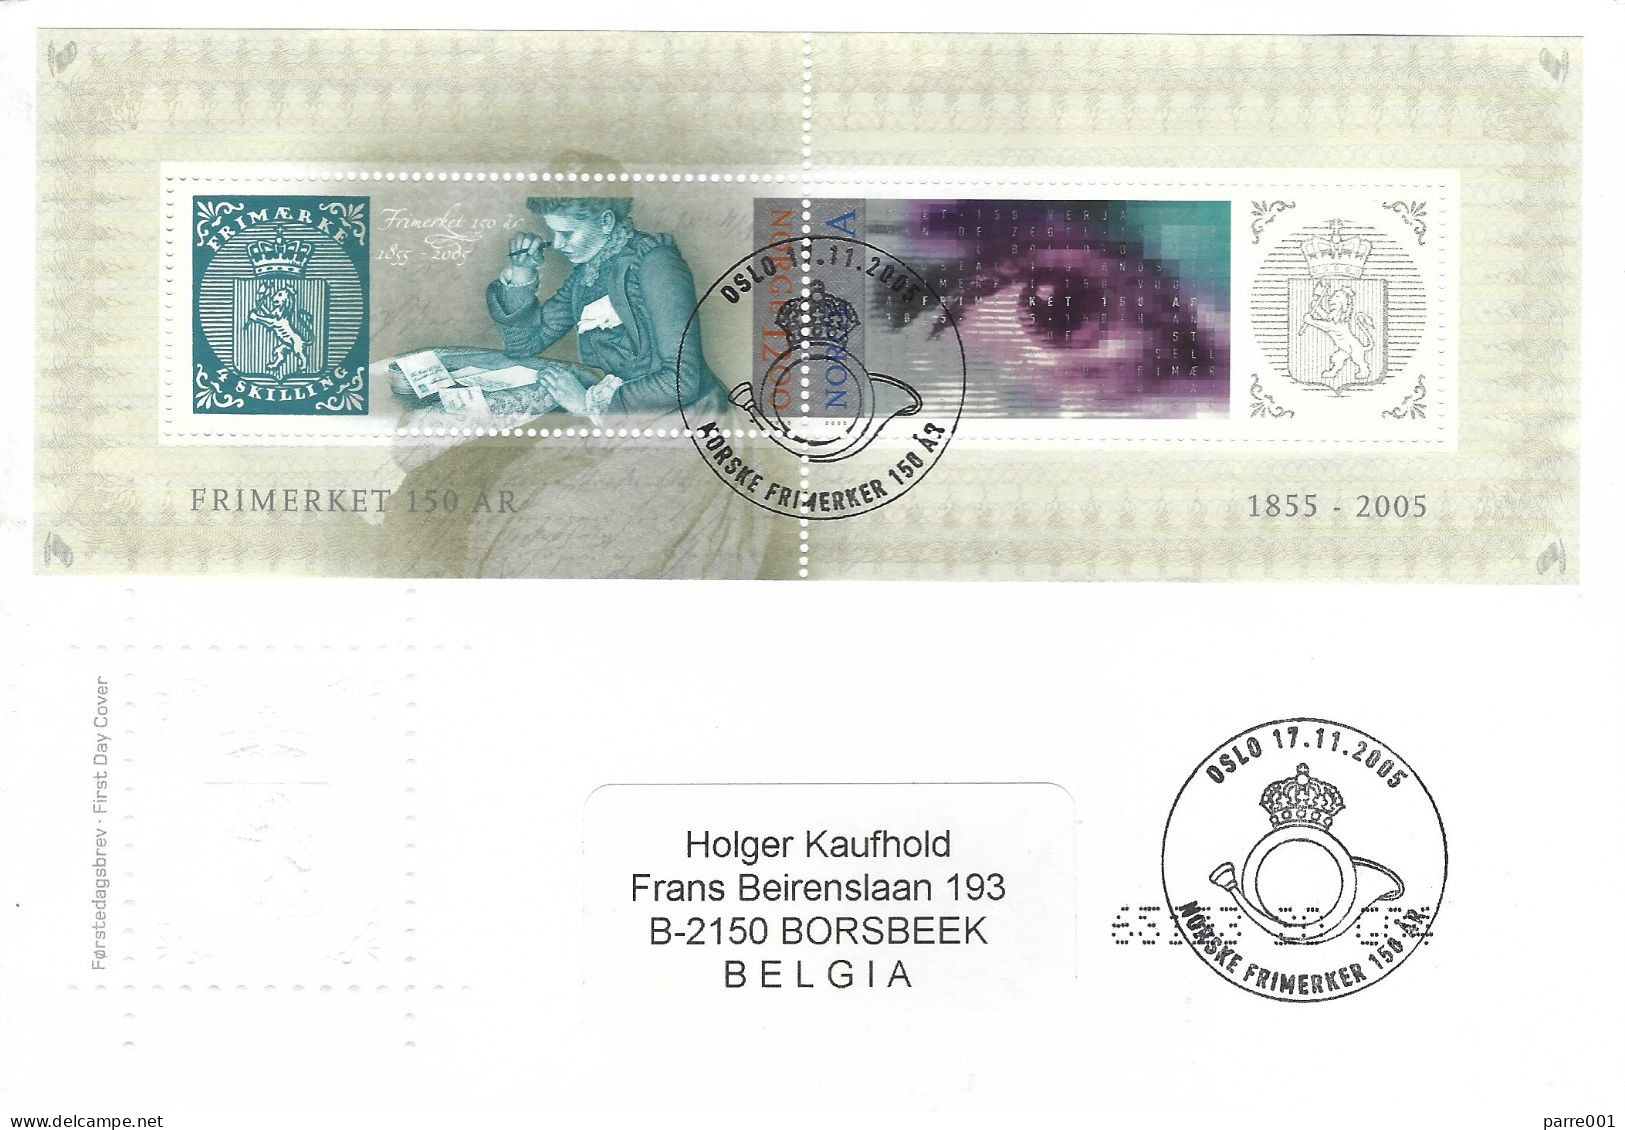 Norway 2005 Oslo 150th Anniversary Norwegian Stamps Human Eye Stamps On Stamp FDC Cover - FDC